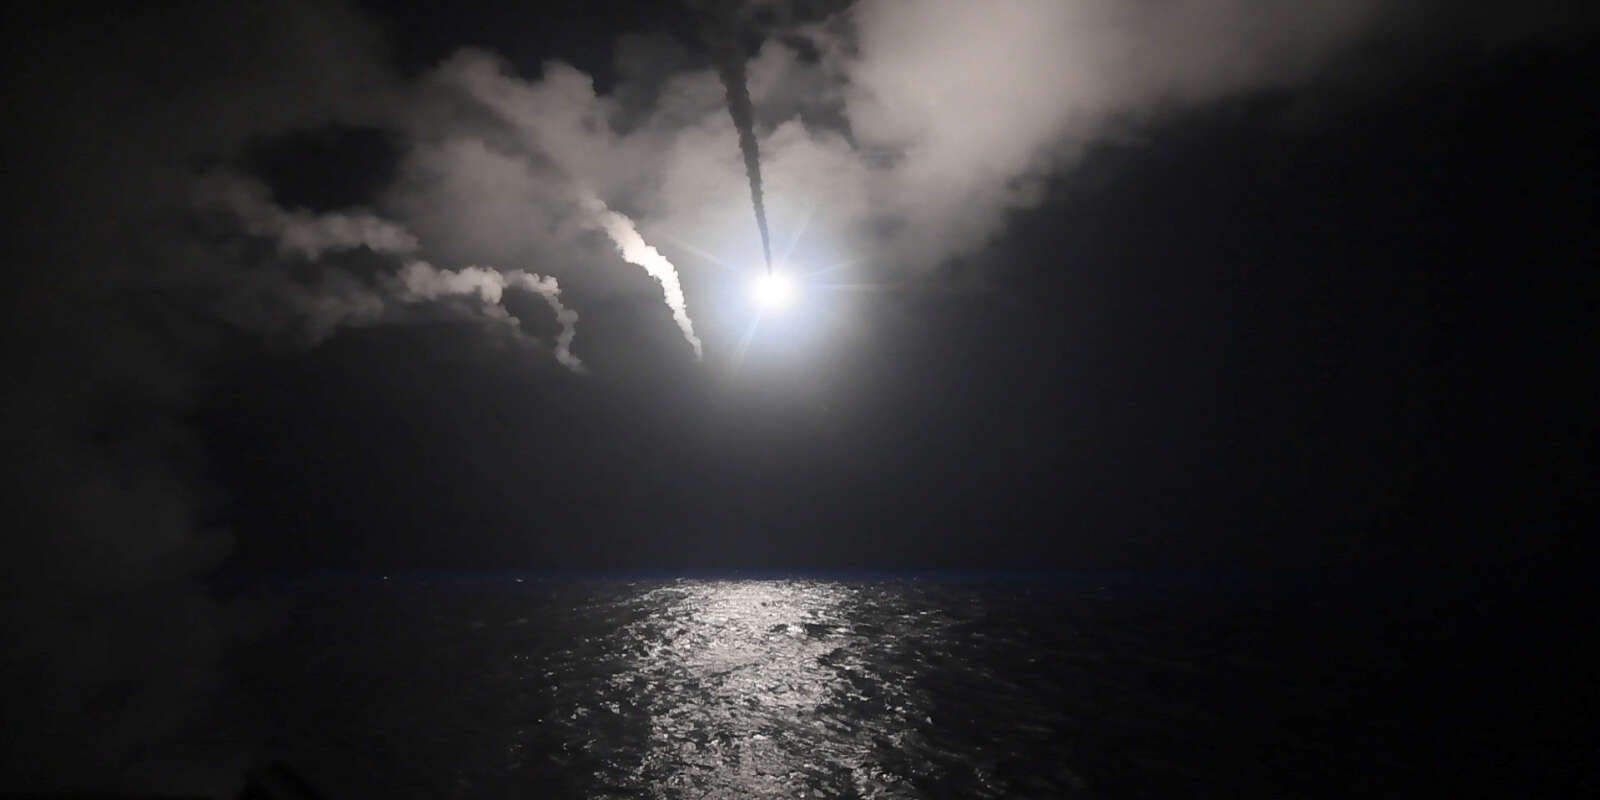 U.S. Navy guided-missile destroyer USS Porter (DDG 78) conducts strike operations while in the Mediterranean Sea which U.S. Defense Department said was a part of cruise missile strike against Syria on April 7, 2017. Ford Williams/Courtesy U.S. Navy/Handout via REUTERS ATTENTION EDITORS - THIS IMAGE WAS PROVIDED BY A THIRD PARTY. EDITORIAL USE ONLY. TPX IMAGES OF THE DAY